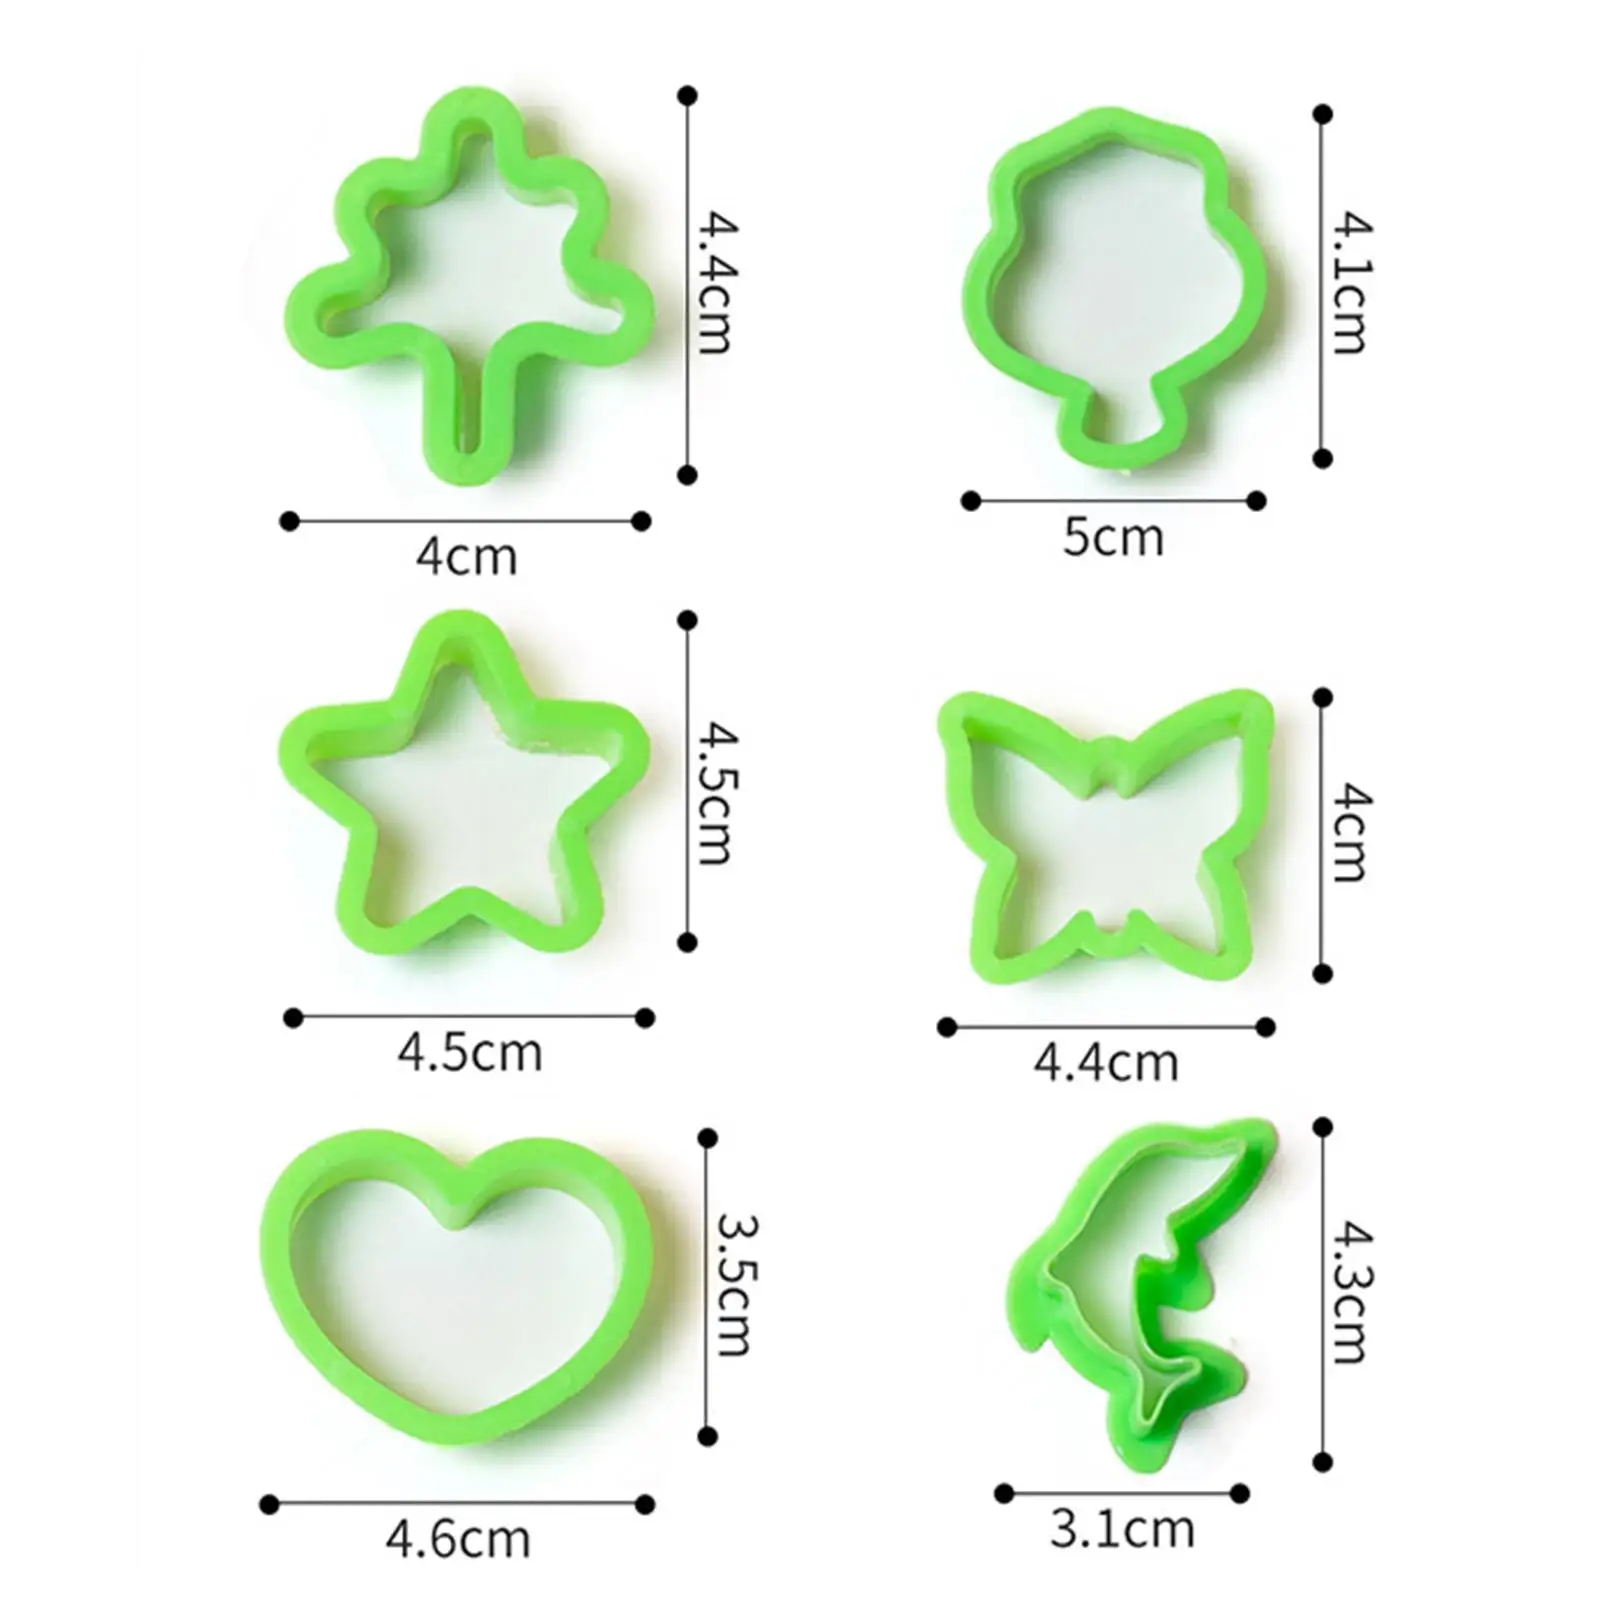 10 Pieces Polymer Clay Cutter Geometry Clay Tools Ceramic Craft Jewelry Making Lightweight Multi Shapes Cutting Models